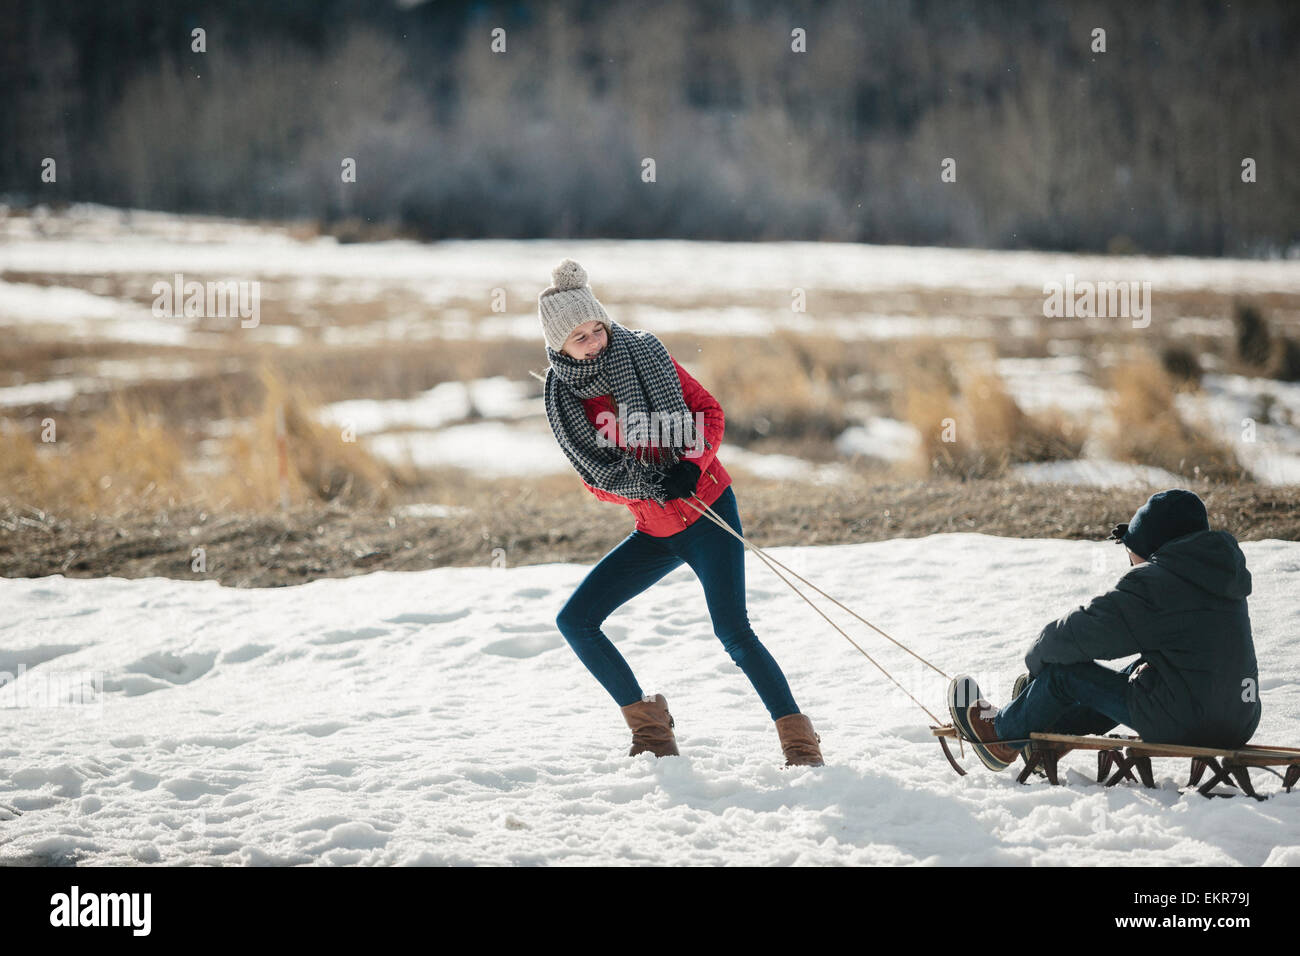 A brother and sister in the snow, one pulling the other on a sledge. Stock Photo